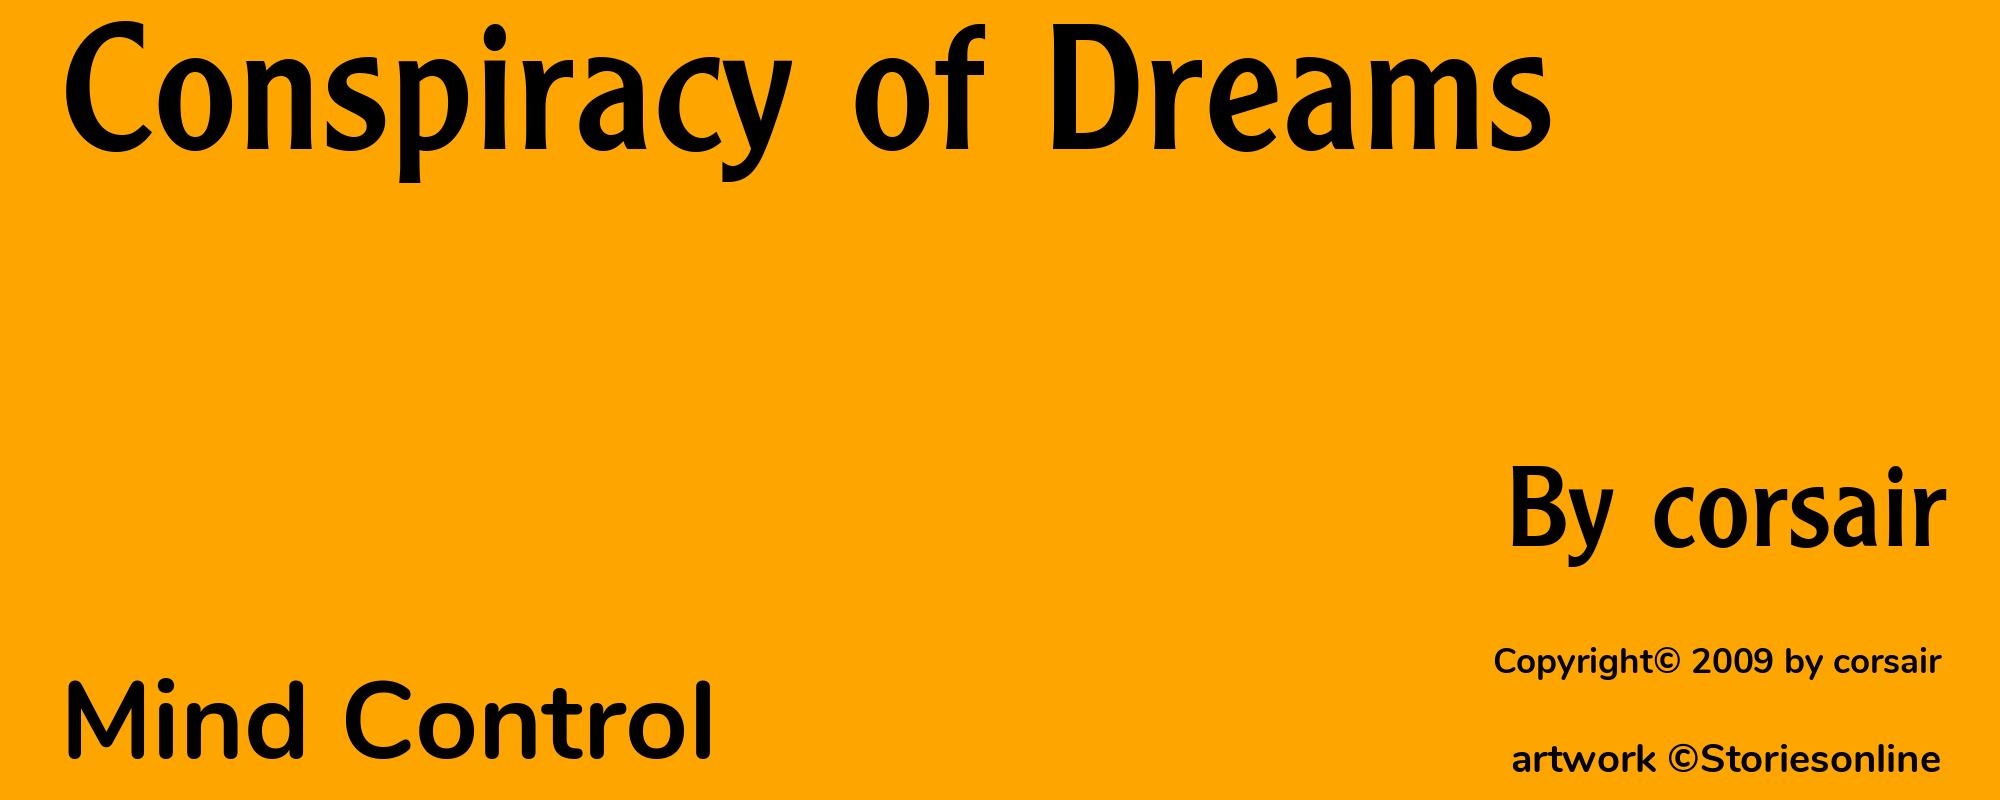 Conspiracy of Dreams - Cover